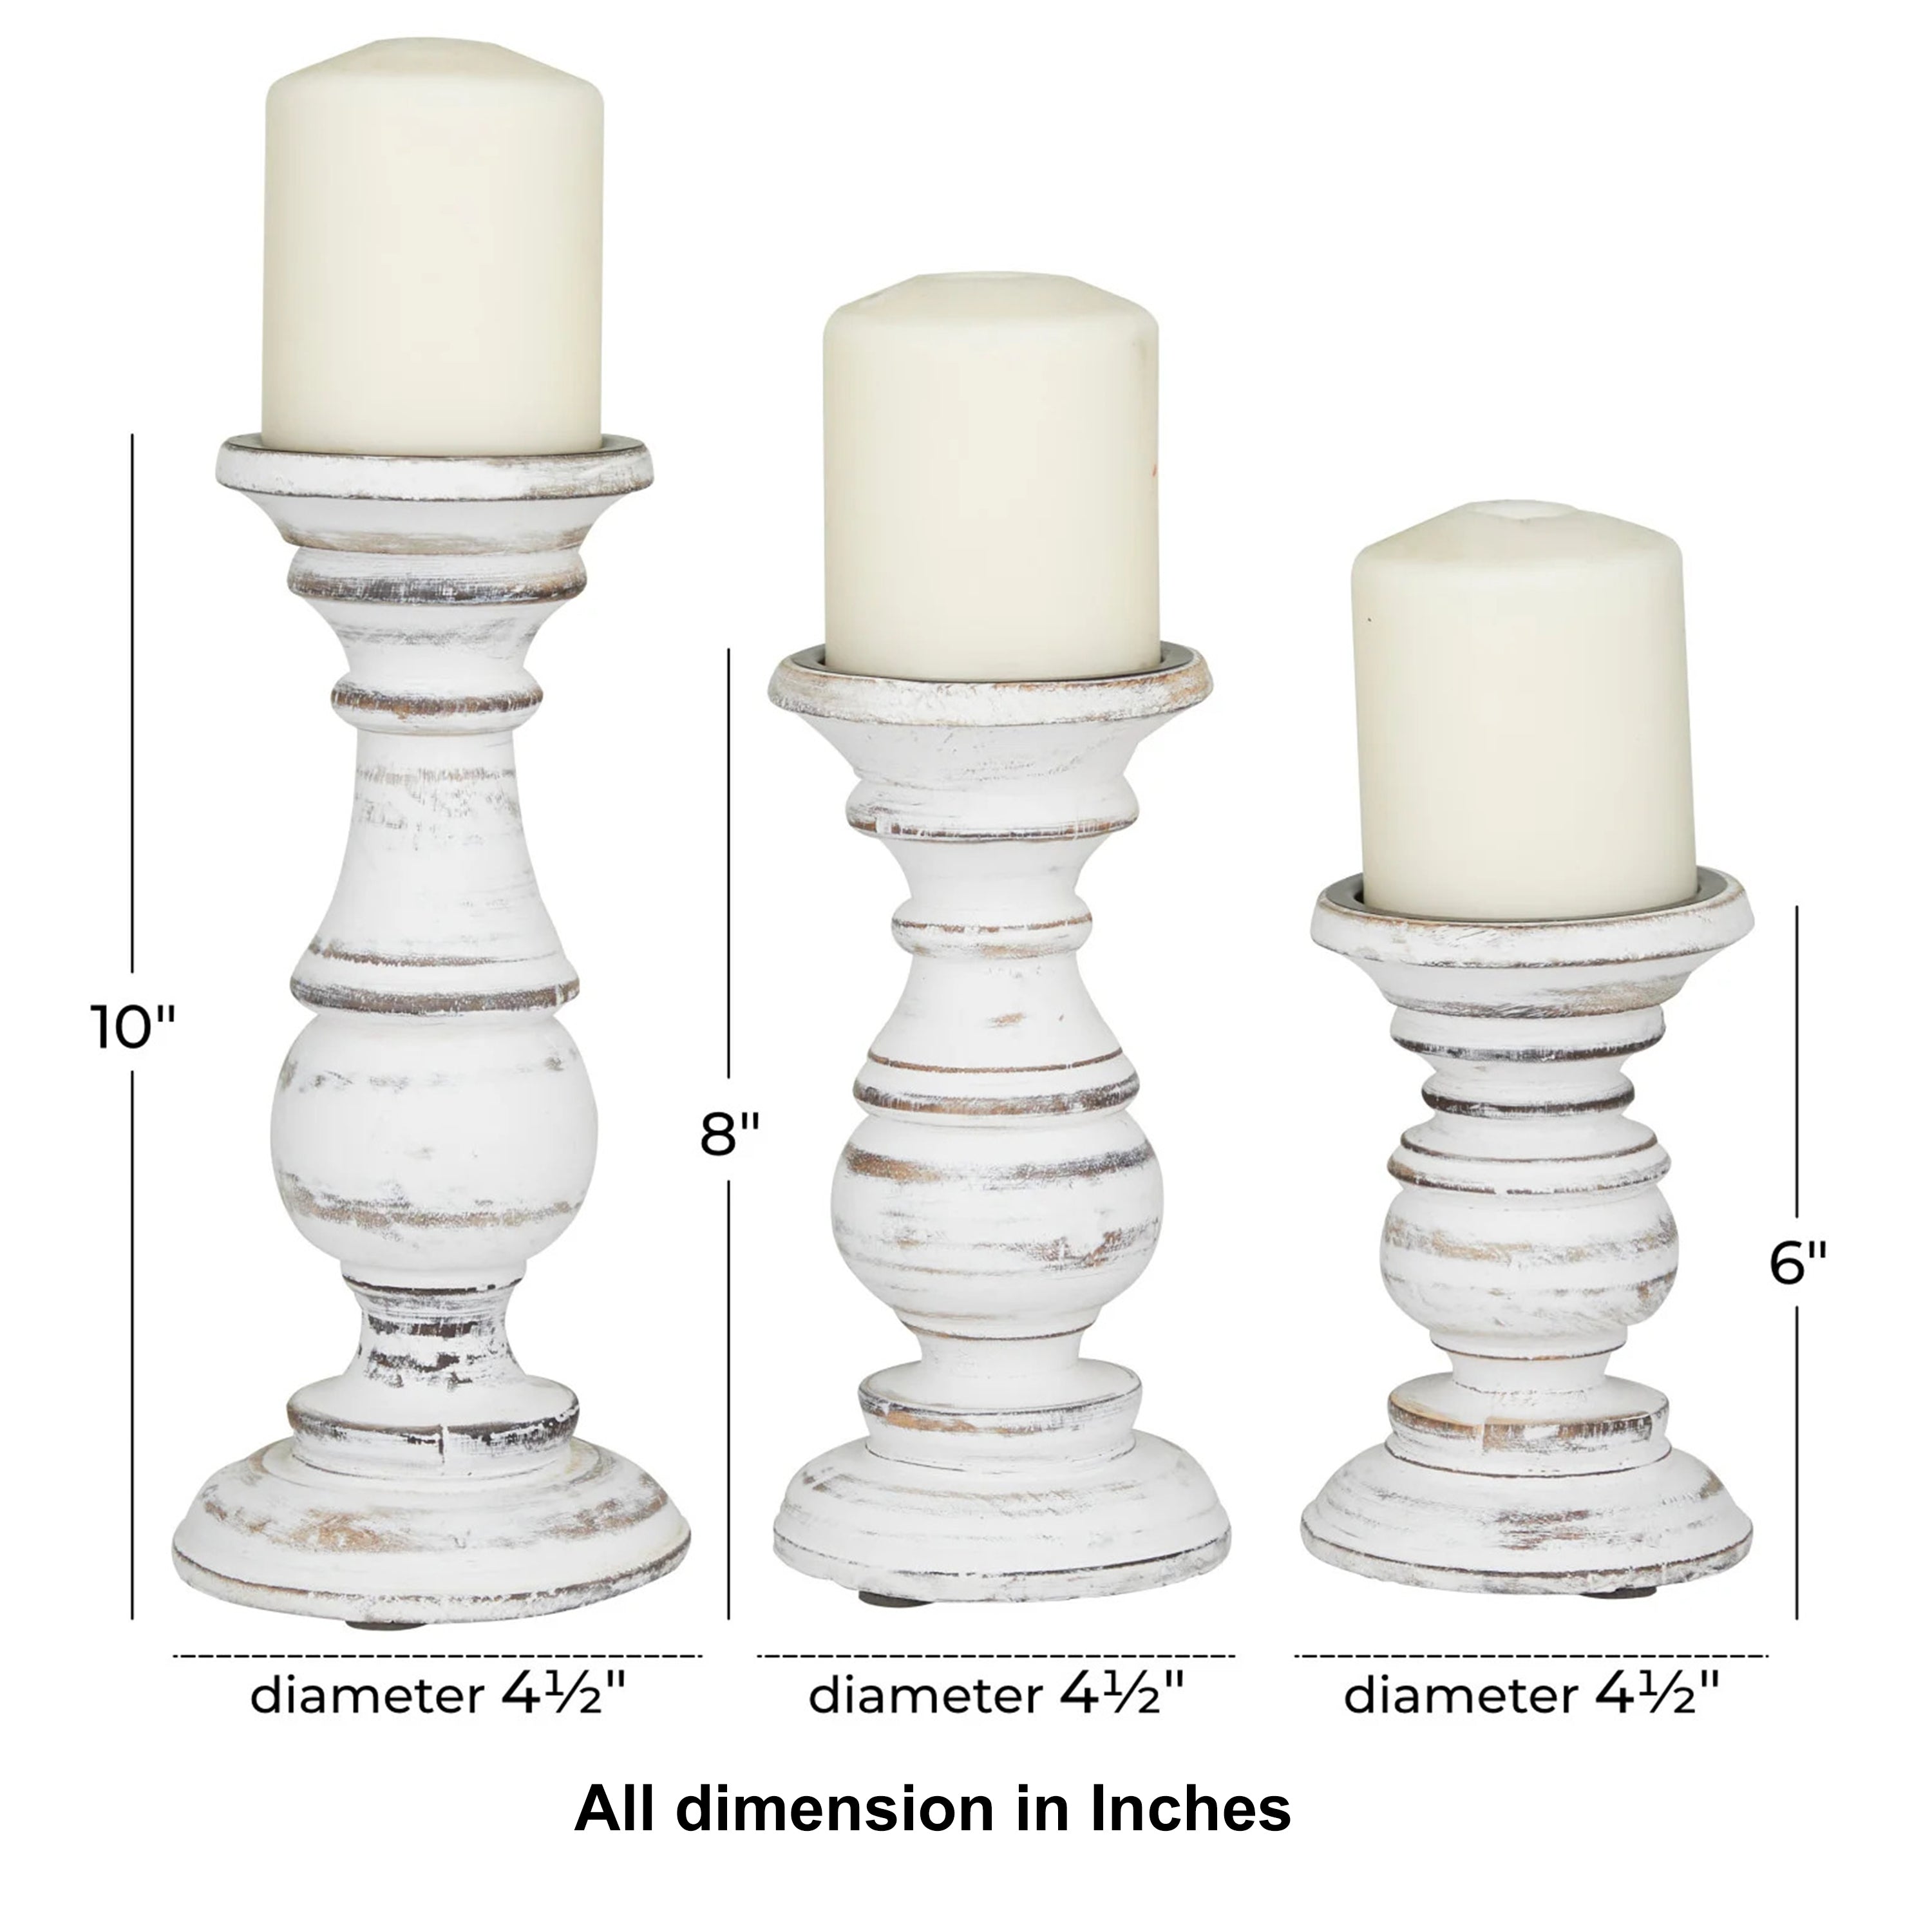 Turned Design Wooden Candle Holder with Distressed Details (Set of 3) - White